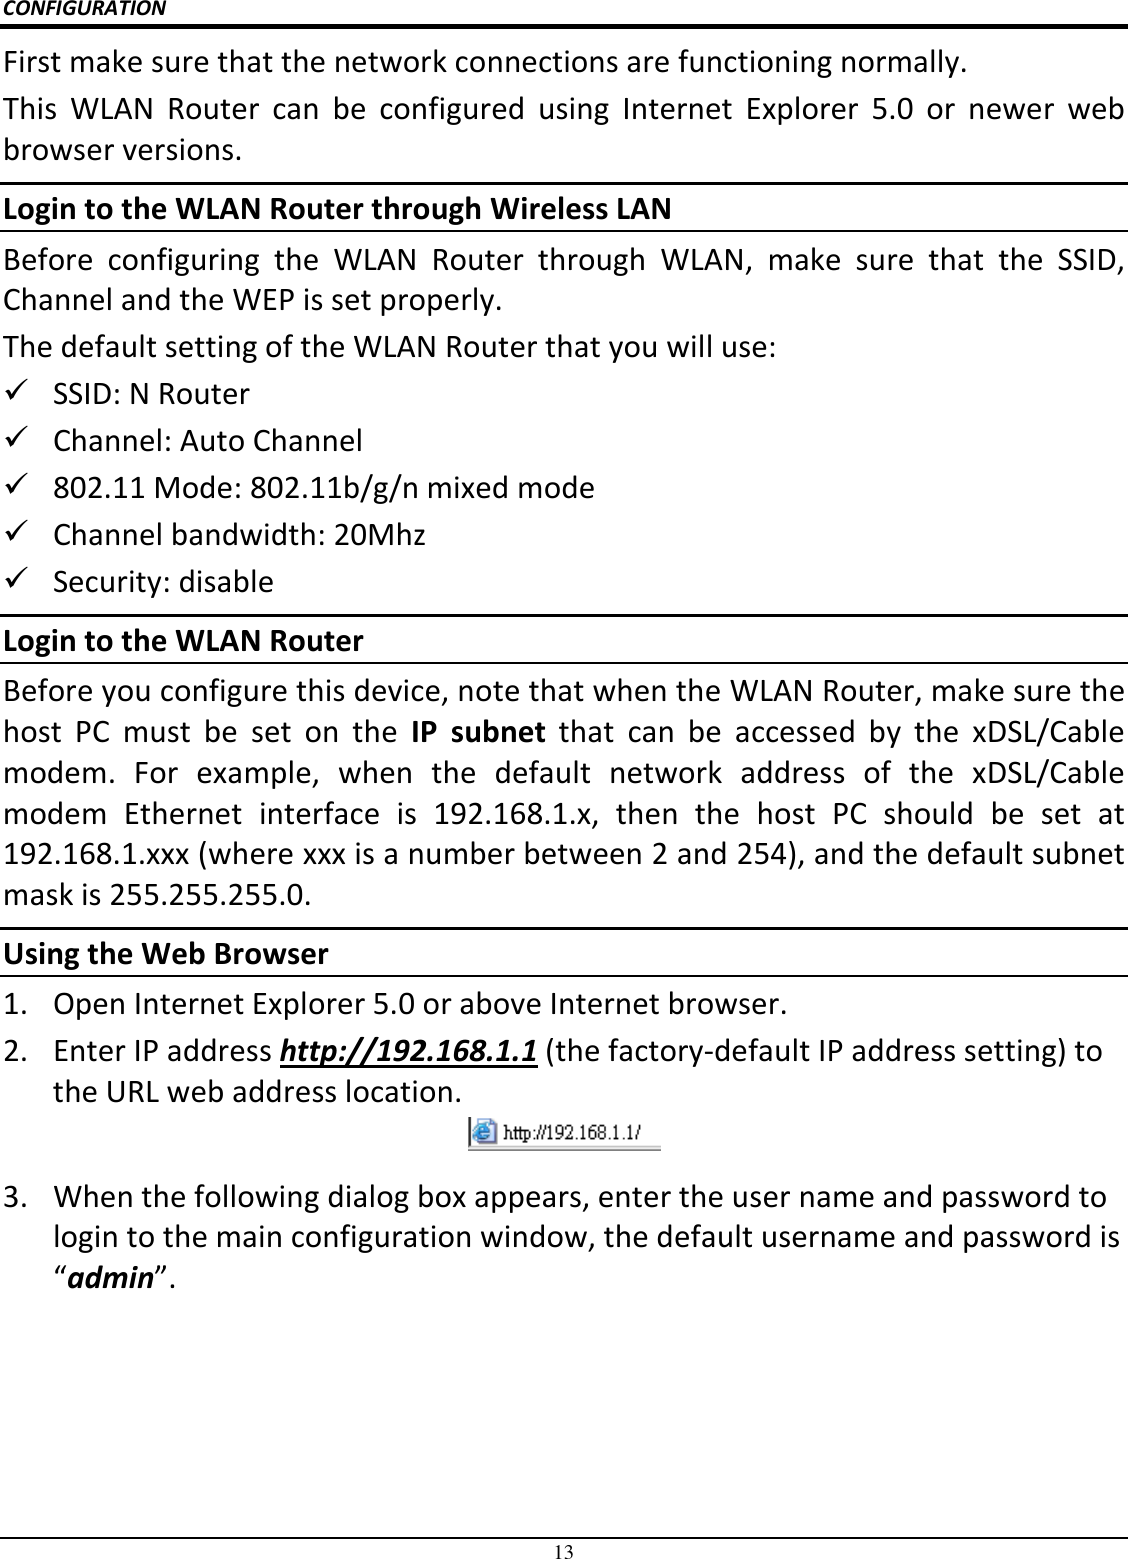 13 CONFIGURATION First make sure that the network connections are functioning normally.  This  WLAN  Router  can  be  configured  using  Internet  Explorer  5.0  or  newer  web browser versions. Login to the WLAN Router through Wireless LAN Before  configuring  the  WLAN  Router  through  WLAN,  make  sure  that  the  SSID, Channel and the WEP is set properly. The default setting of the WLAN Router that you will use:  SSID: N Router  Channel: Auto Channel  802.11 Mode: 802.11b/g/n mixed mode  Channel bandwidth: 20Mhz  Security: disable Login to the WLAN Router Before you configure this device, note that when the WLAN Router, make sure the host  PC  must  be  set  on  the  IP  subnet  that  can  be  accessed  by  the  xDSL/Cable modem.  For  example,  when  the  default  network  address  of  the  xDSL/Cable modem  Ethernet  interface  is  192.168.1.x,  then  the  host  PC  should  be  set  at 192.168.1.xxx (where xxx is a number between 2 and 254), and the default subnet mask is 255.255.255.0. Using the Web Browser 1. Open Internet Explorer 5.0 or above Internet browser. 2. Enter IP address http://192.168.1.1 (the factory-default IP address setting) to the URL web address location.  3. When the following dialog box appears, enter the user name and password to login to the main configuration window, the default username and password is “admin”. 